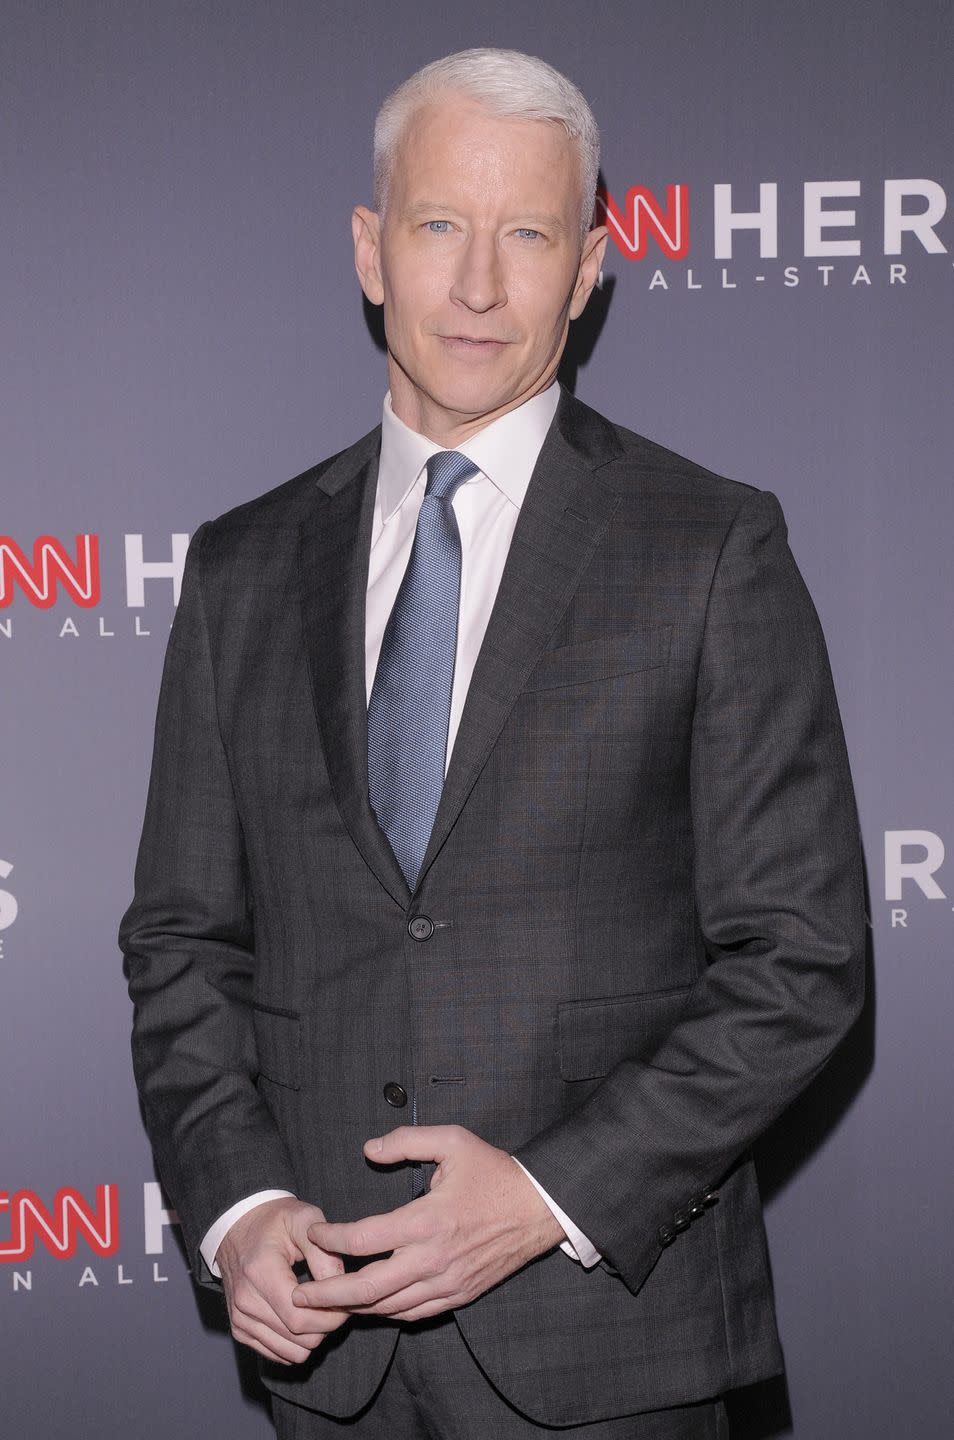 Now: Anderson Cooper